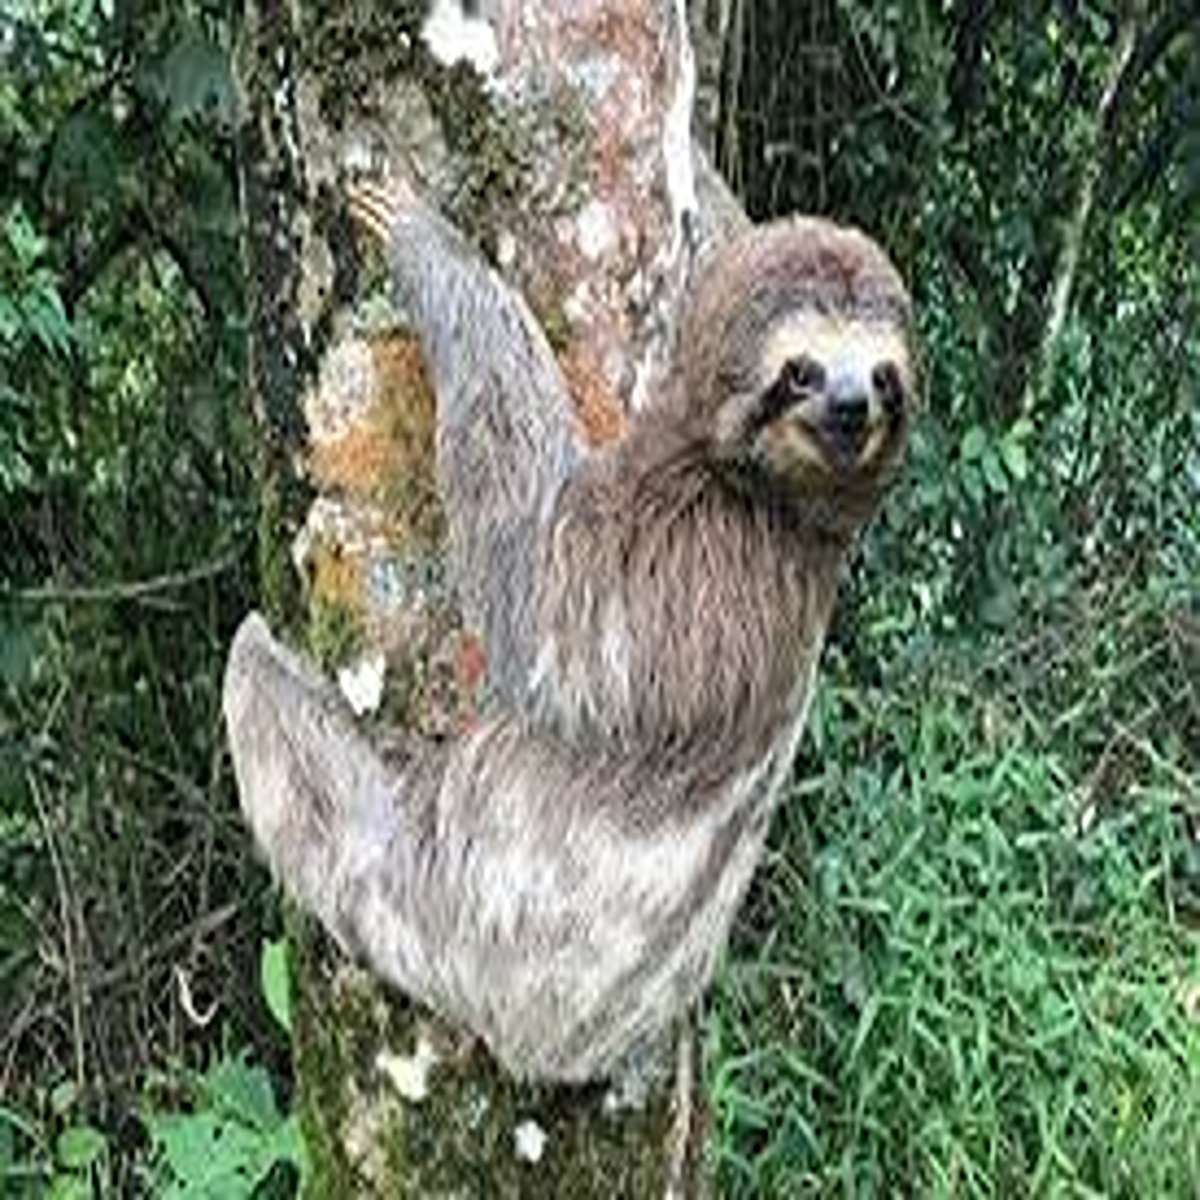 Now, sloths hang from trees. And when they die, they don't let go of the tree. So if you're ever in the rainforest, and you happen to see a sloth hanging from a tree, poke it with a long stick to see if it's still alive. But remember, they have a really s